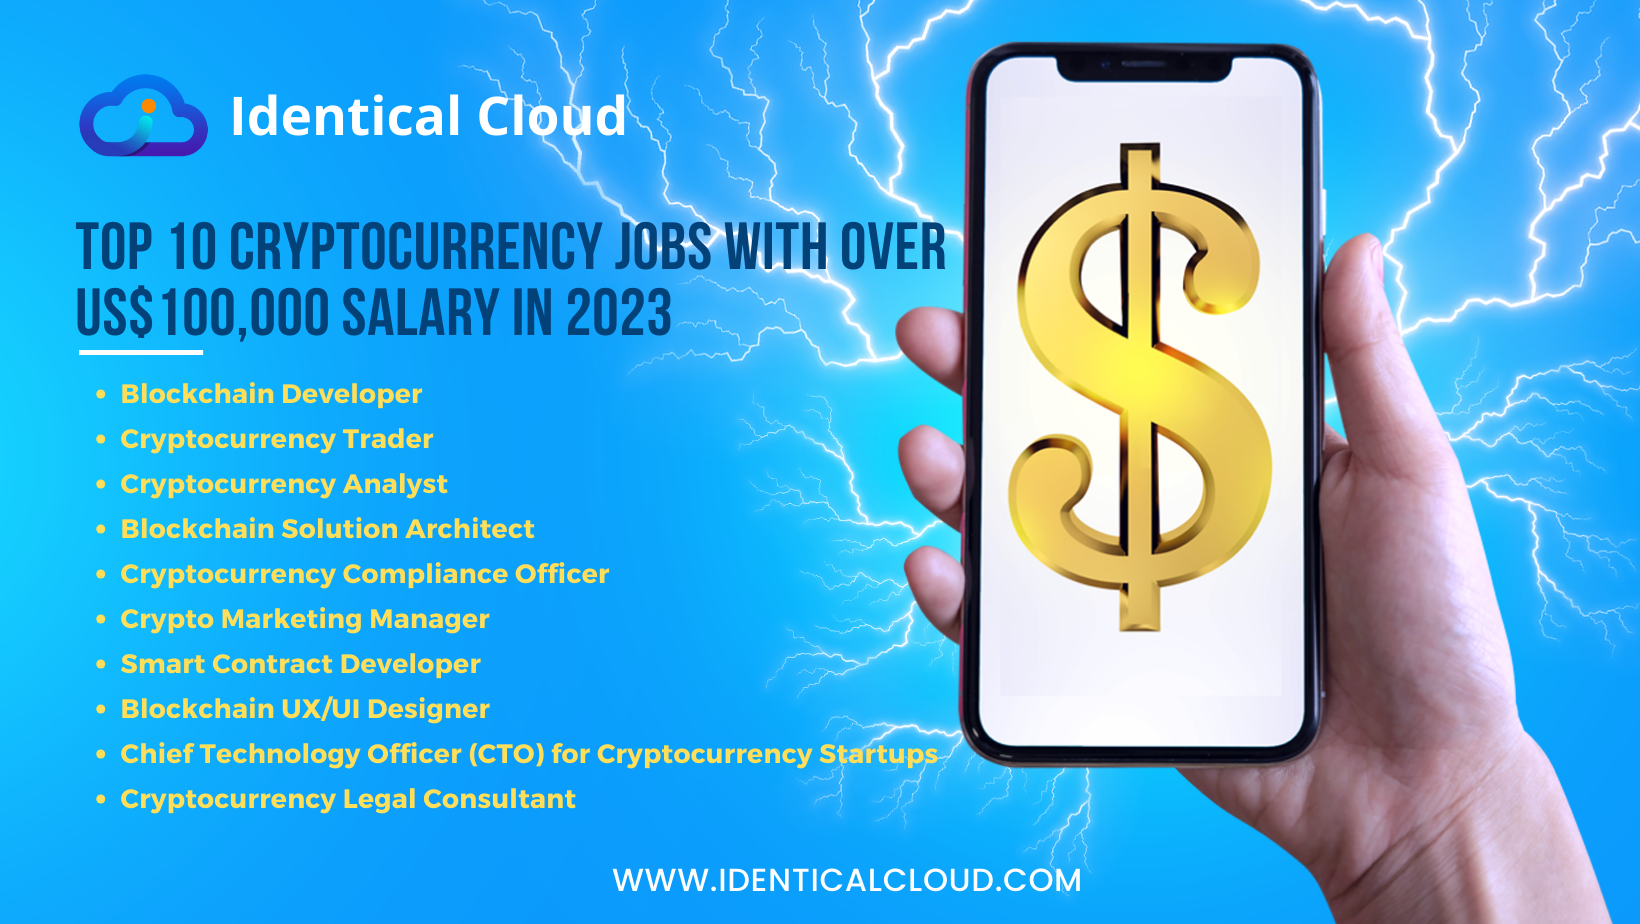 Top 10 Cryptocurrency Jobs with over US$100,000 Salary in 2023 - identicalcloud.com